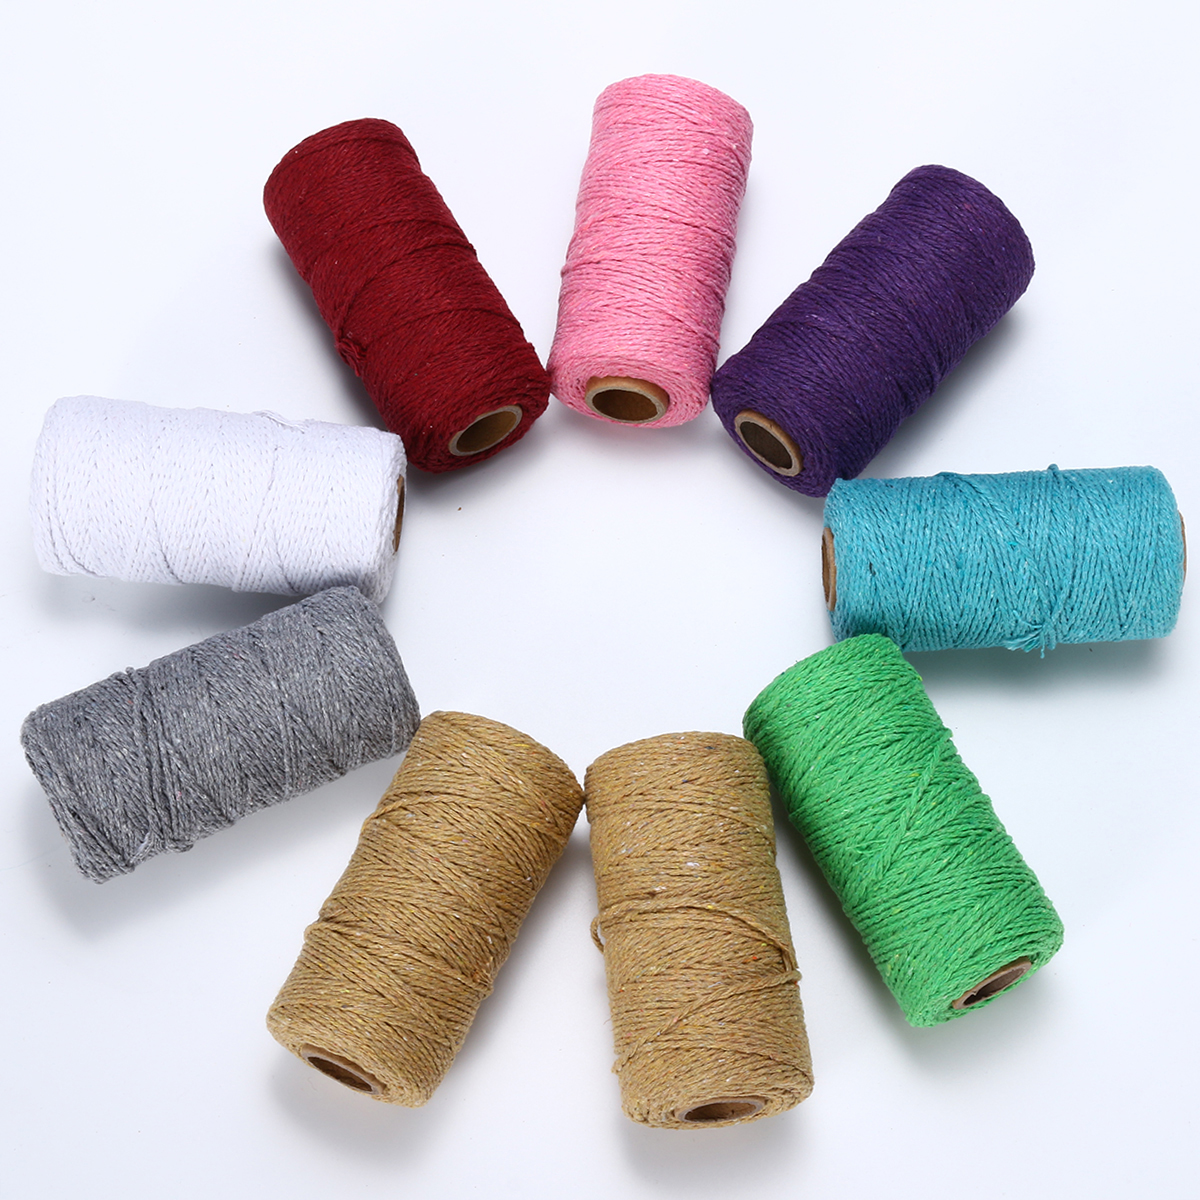 

2MM Macrame Rustic Rope Colorful Cotton Twisted Cord String DIY Wedding Decor Supplies